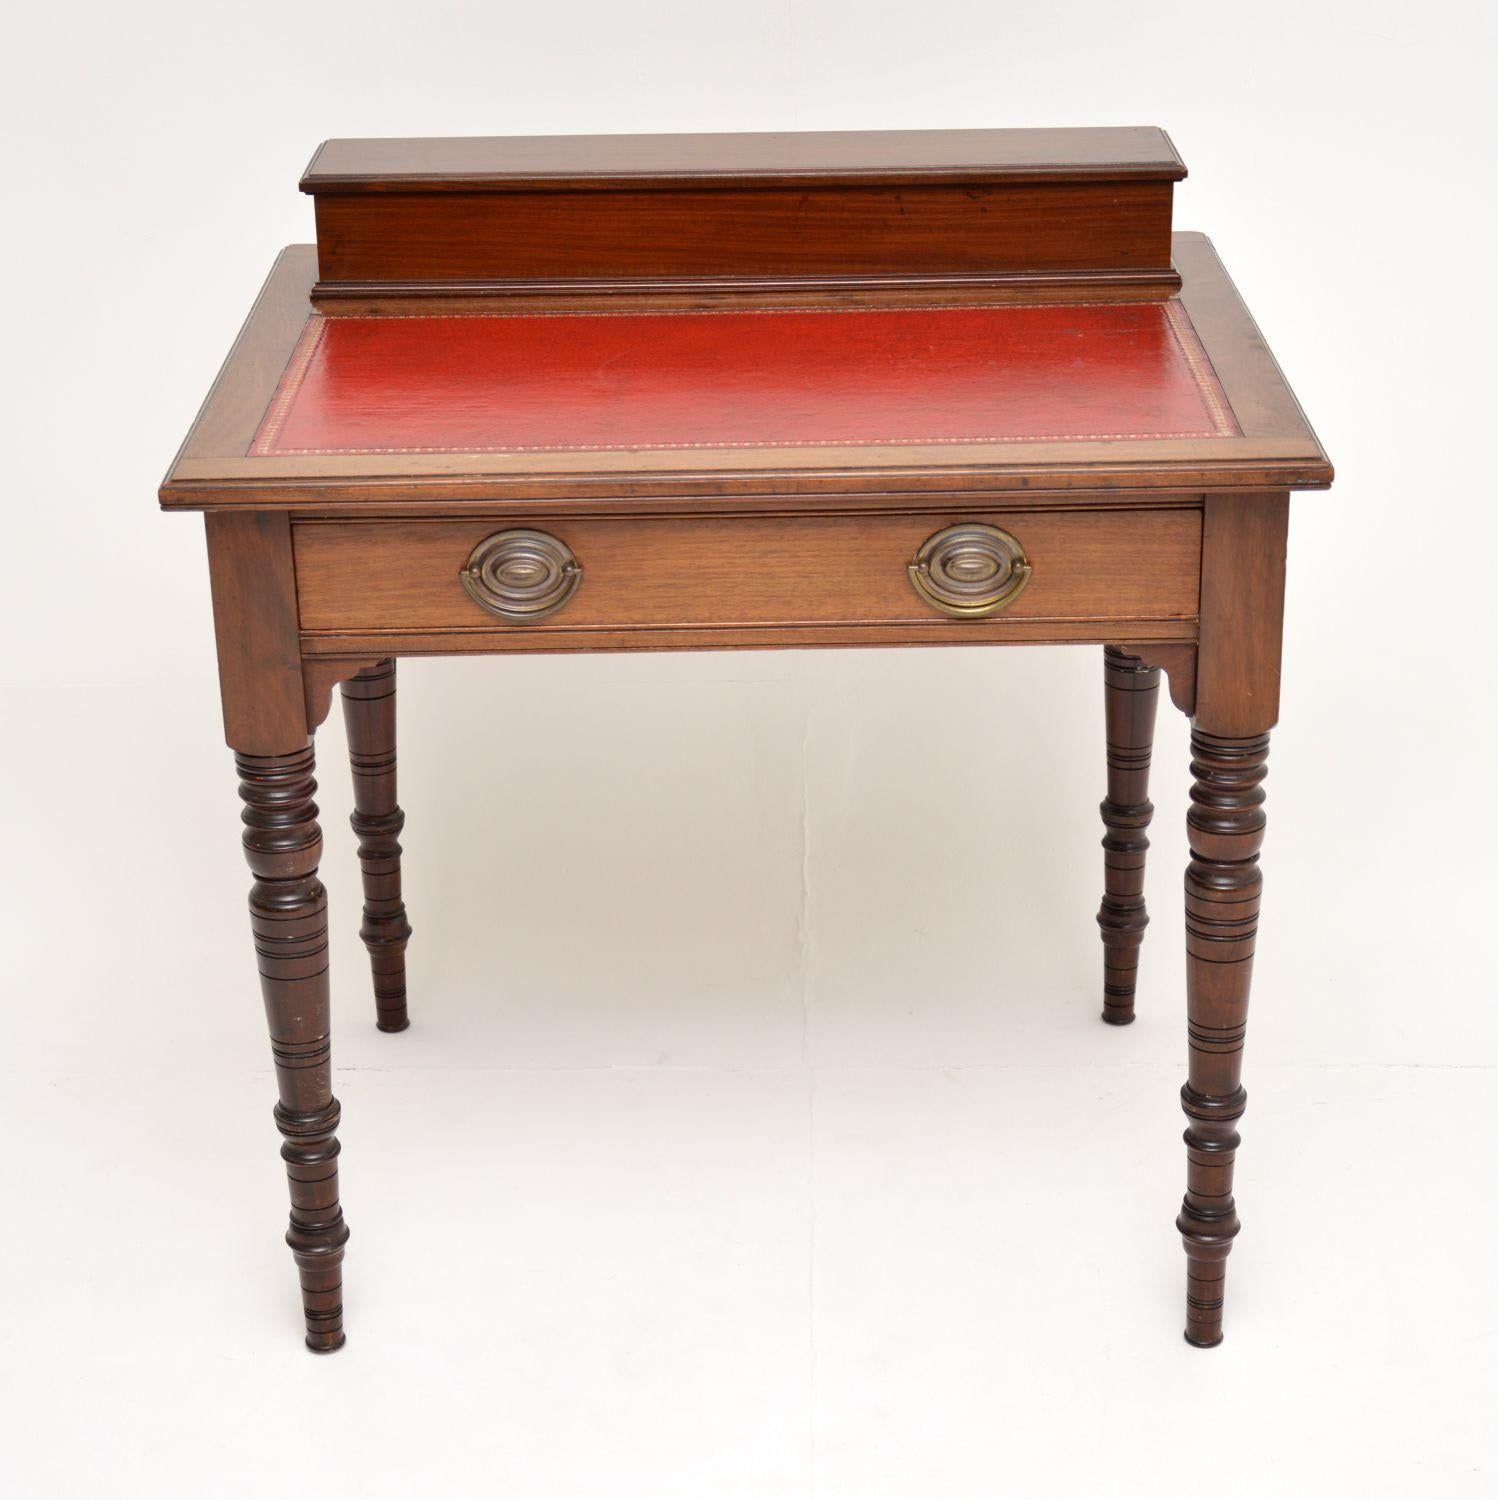 A smart and extremely well made late Victorian writing table in Mahogany with a leather writing surface. This dates from circa 1880s period, it is in wonderful original condition, with only some very minor wear commensurate for age. The tooled red